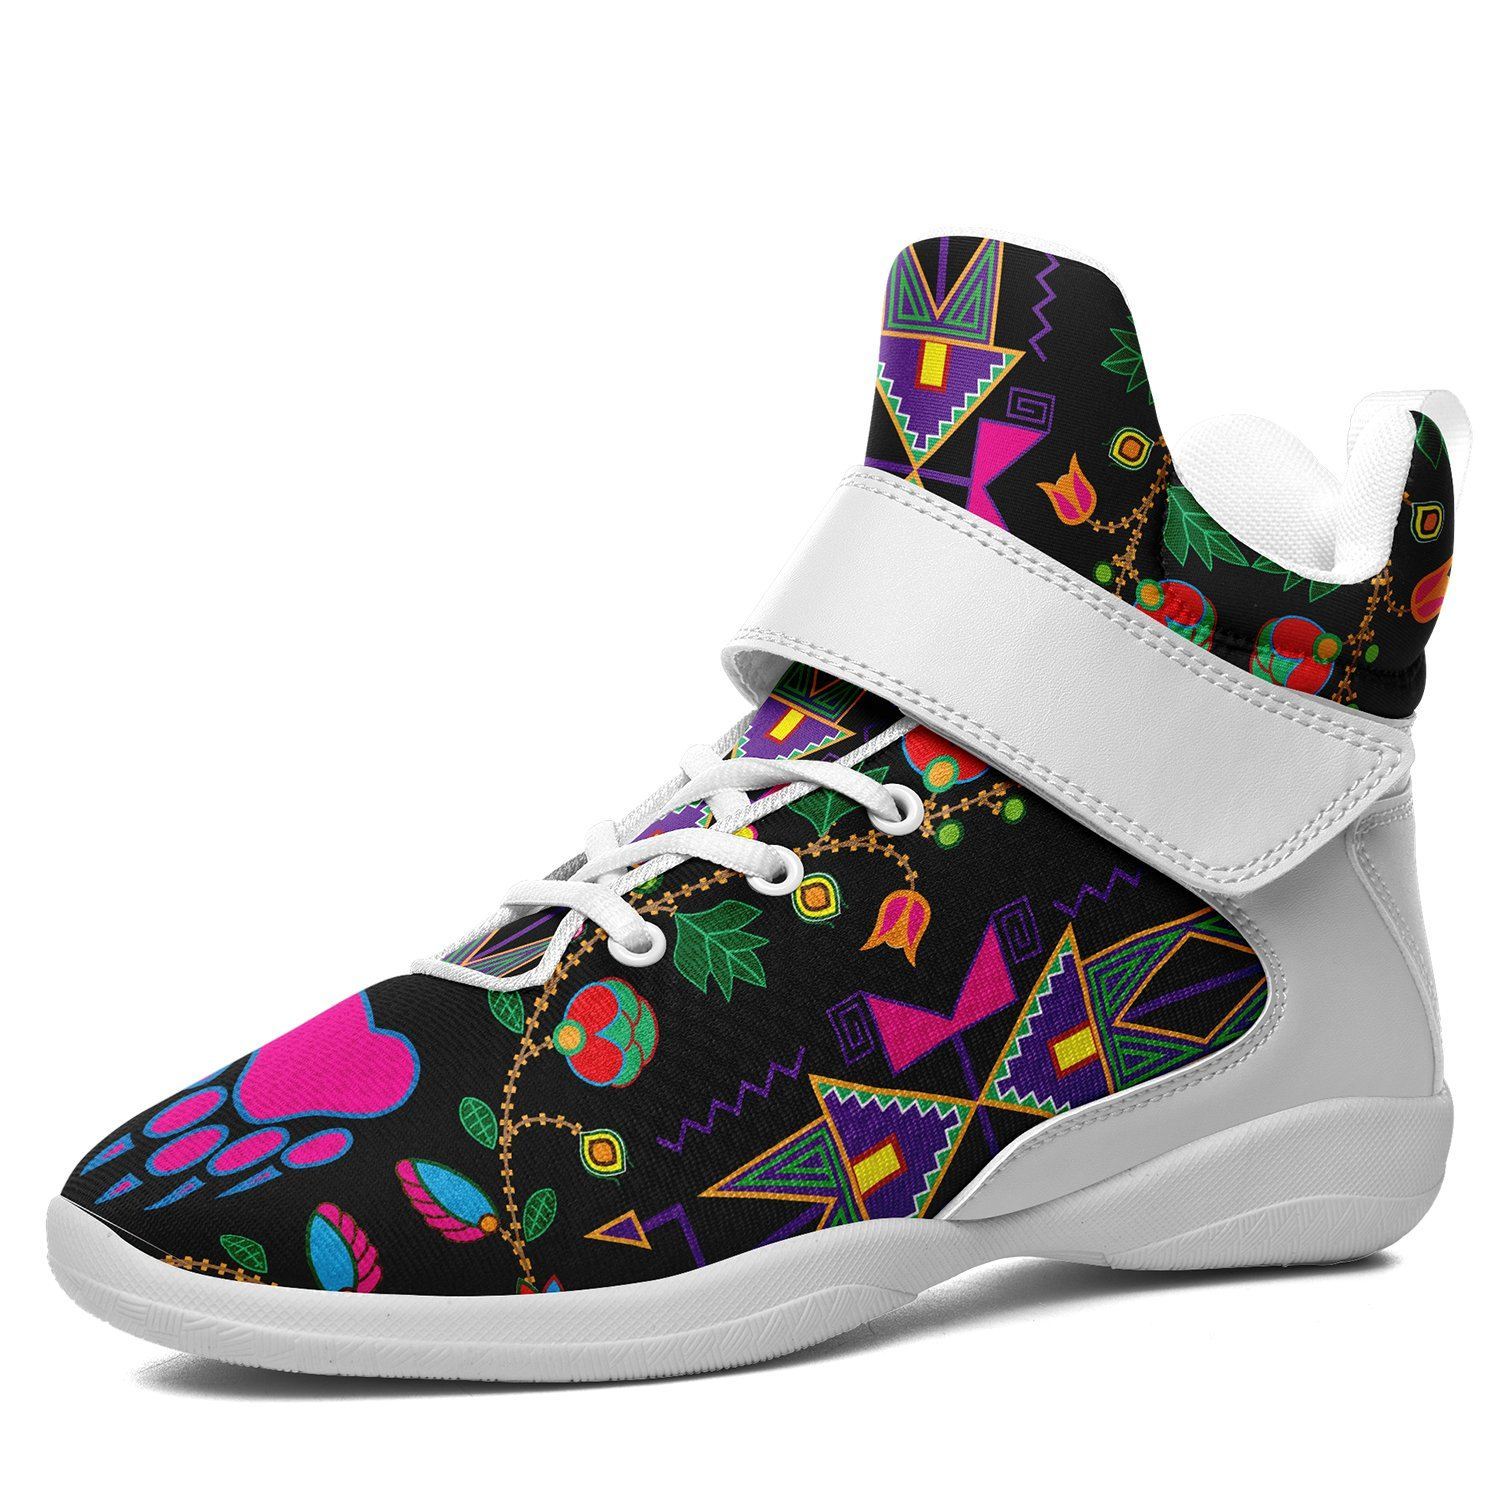 Geometric Floral Fall Black Ipottaa Basketball / Sport High Top Shoes - White Sole 49 Dzine US Women 8.5 / US Men 7 / EUR 40 White Sole with White Strap 